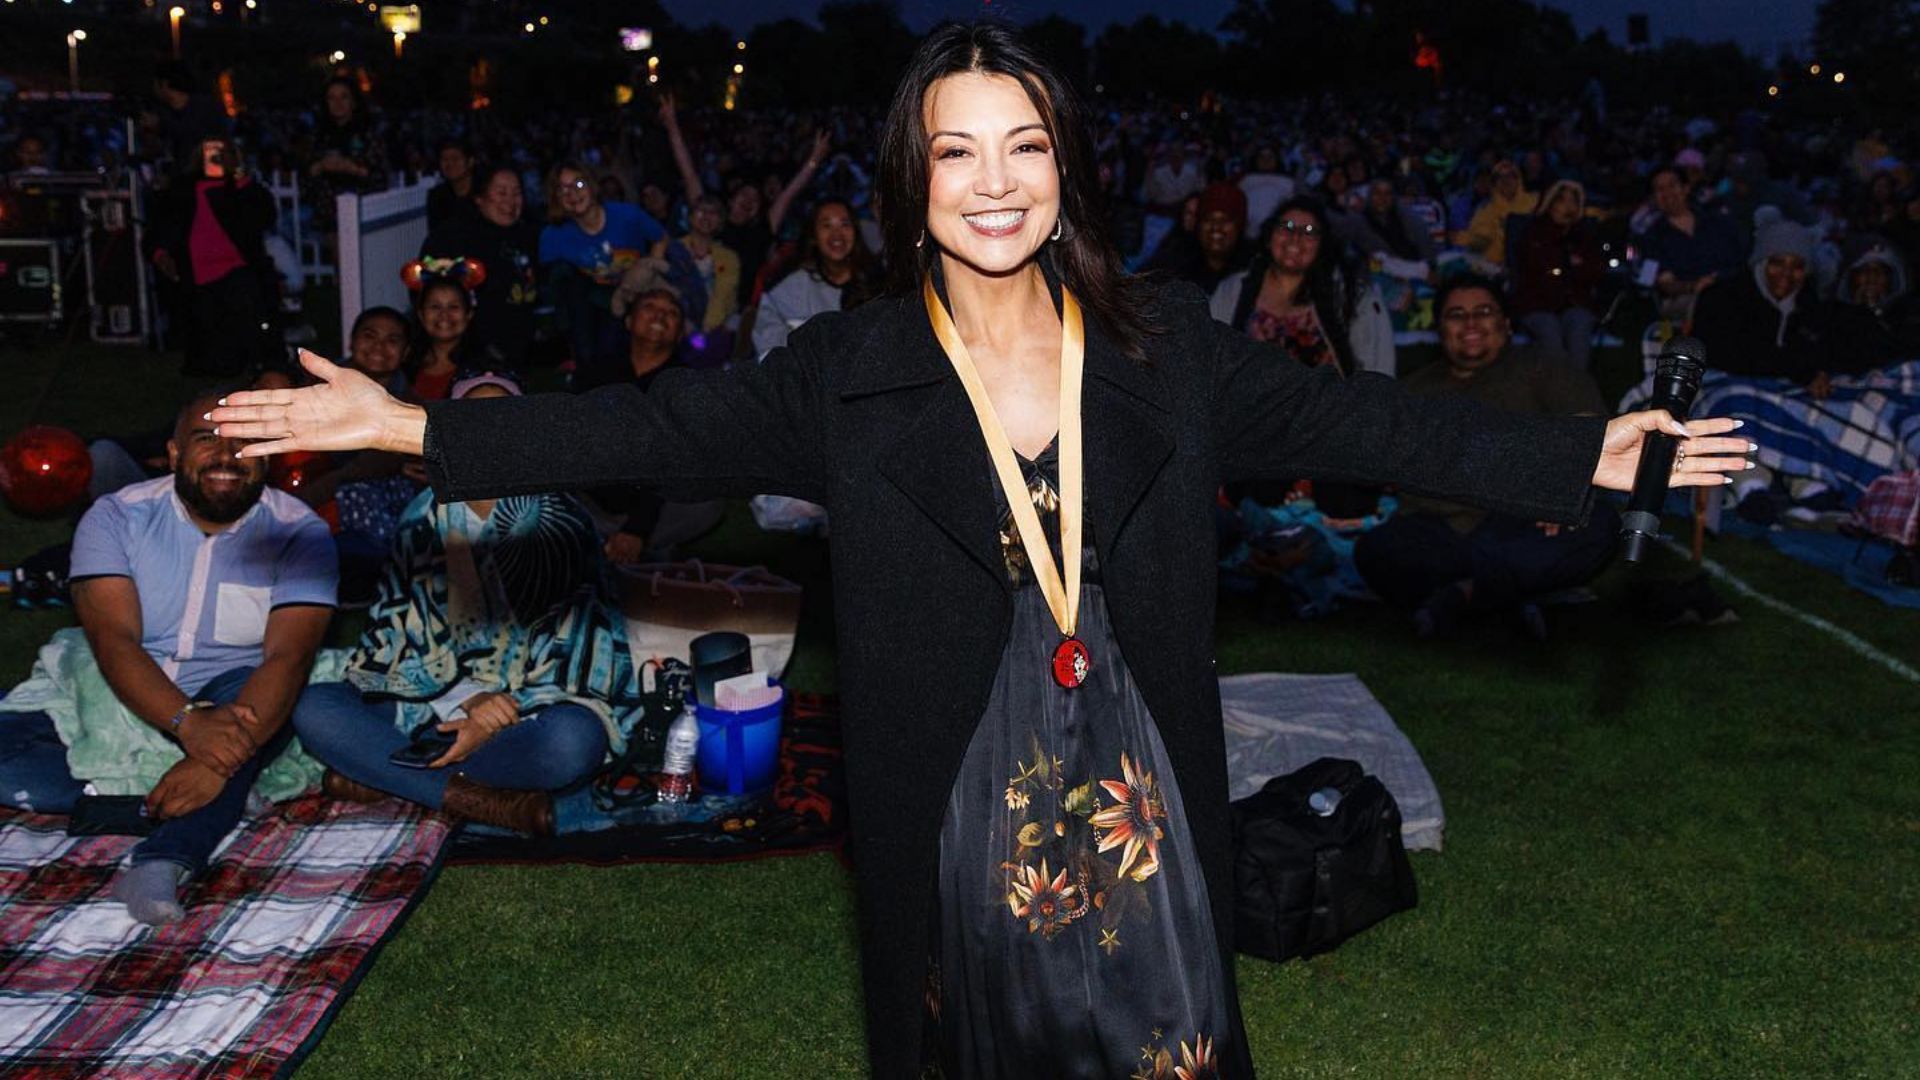 All you need to know about 'Mulan' fame Ming-Na Wen